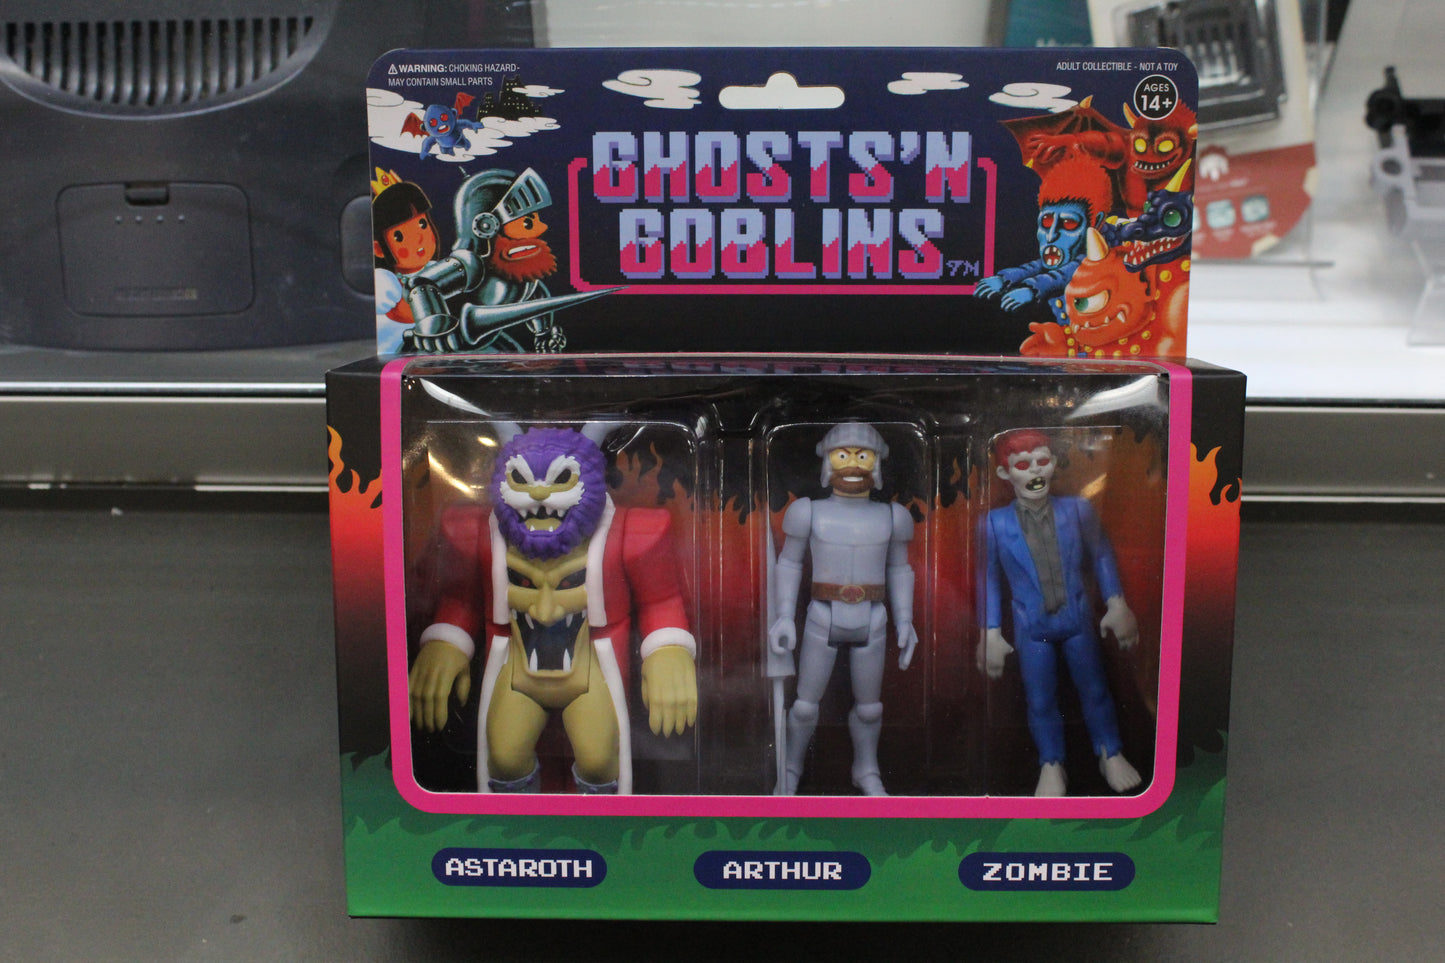 Ghosts' N Goblins Reaction Figure Set-New (Astaroth, Arthur and Zombie)